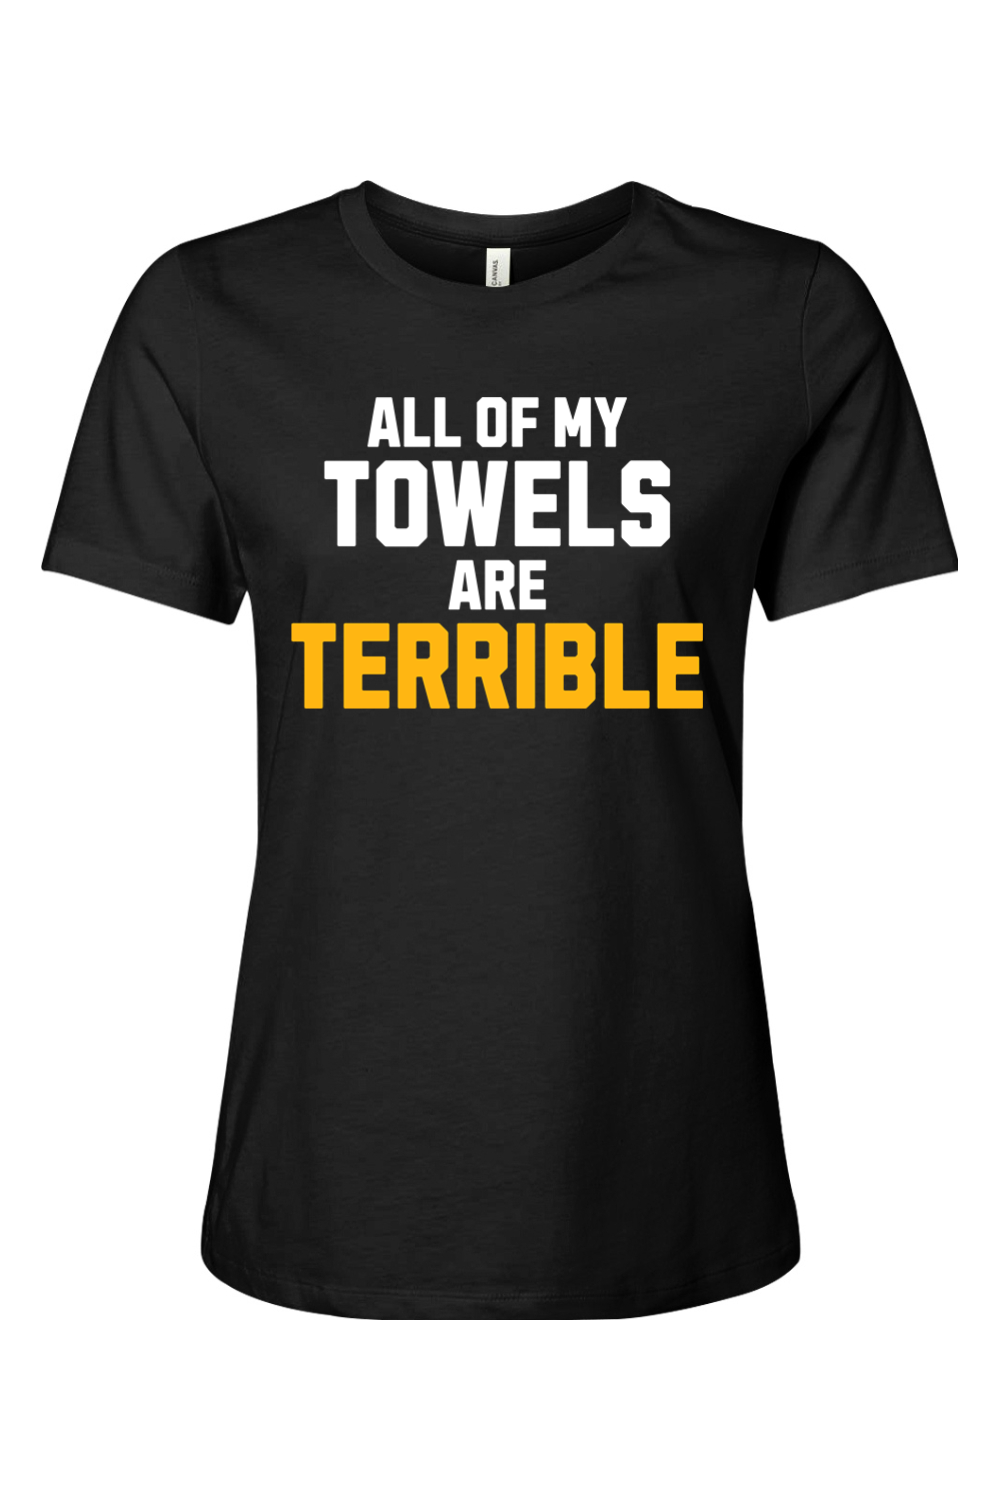 All of My Towels are Terrible - Ladies Tee - Yinzylvania